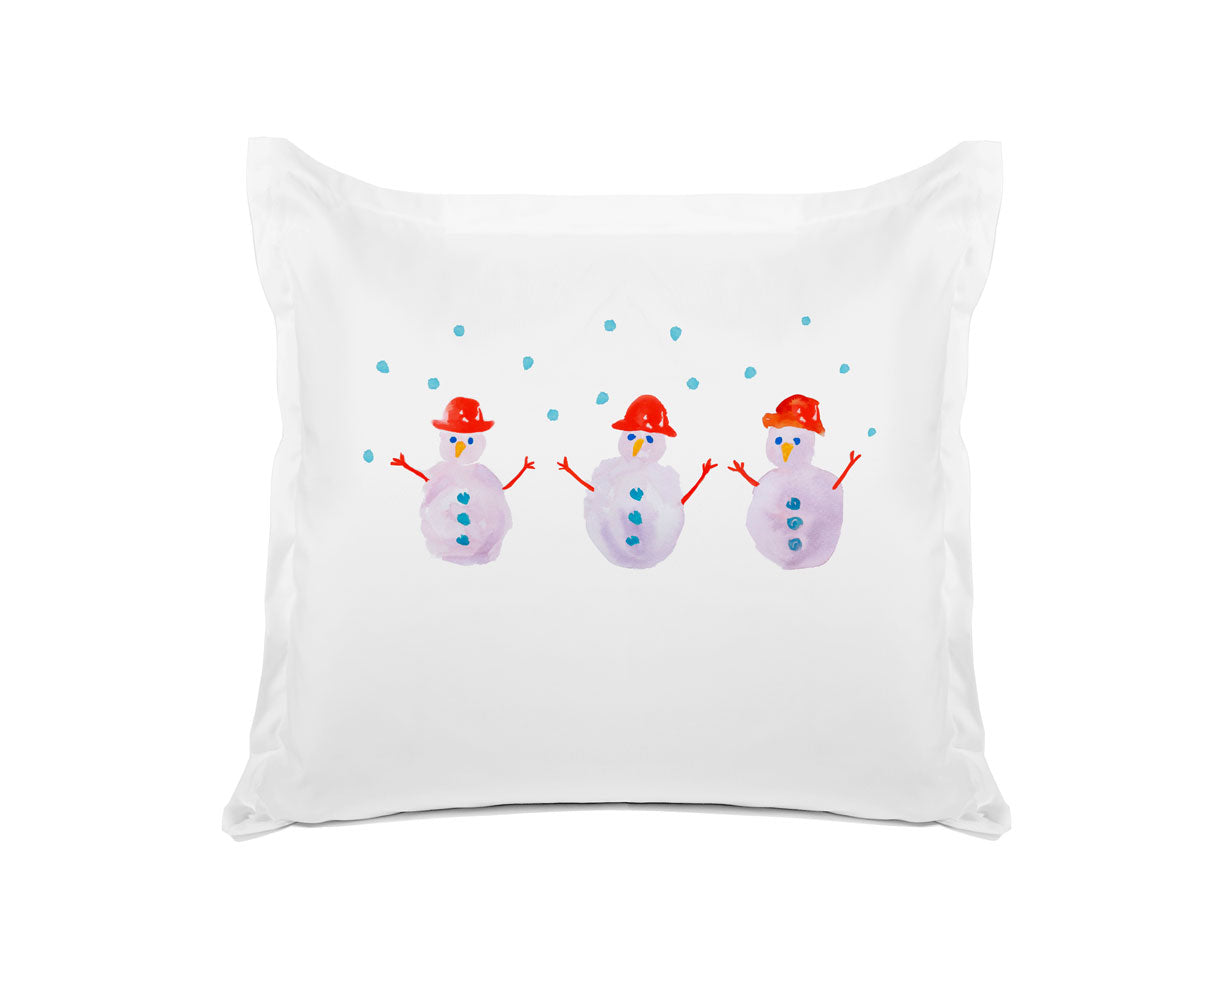 Winter Snowman - Kids Personalized Pillowcase Collection